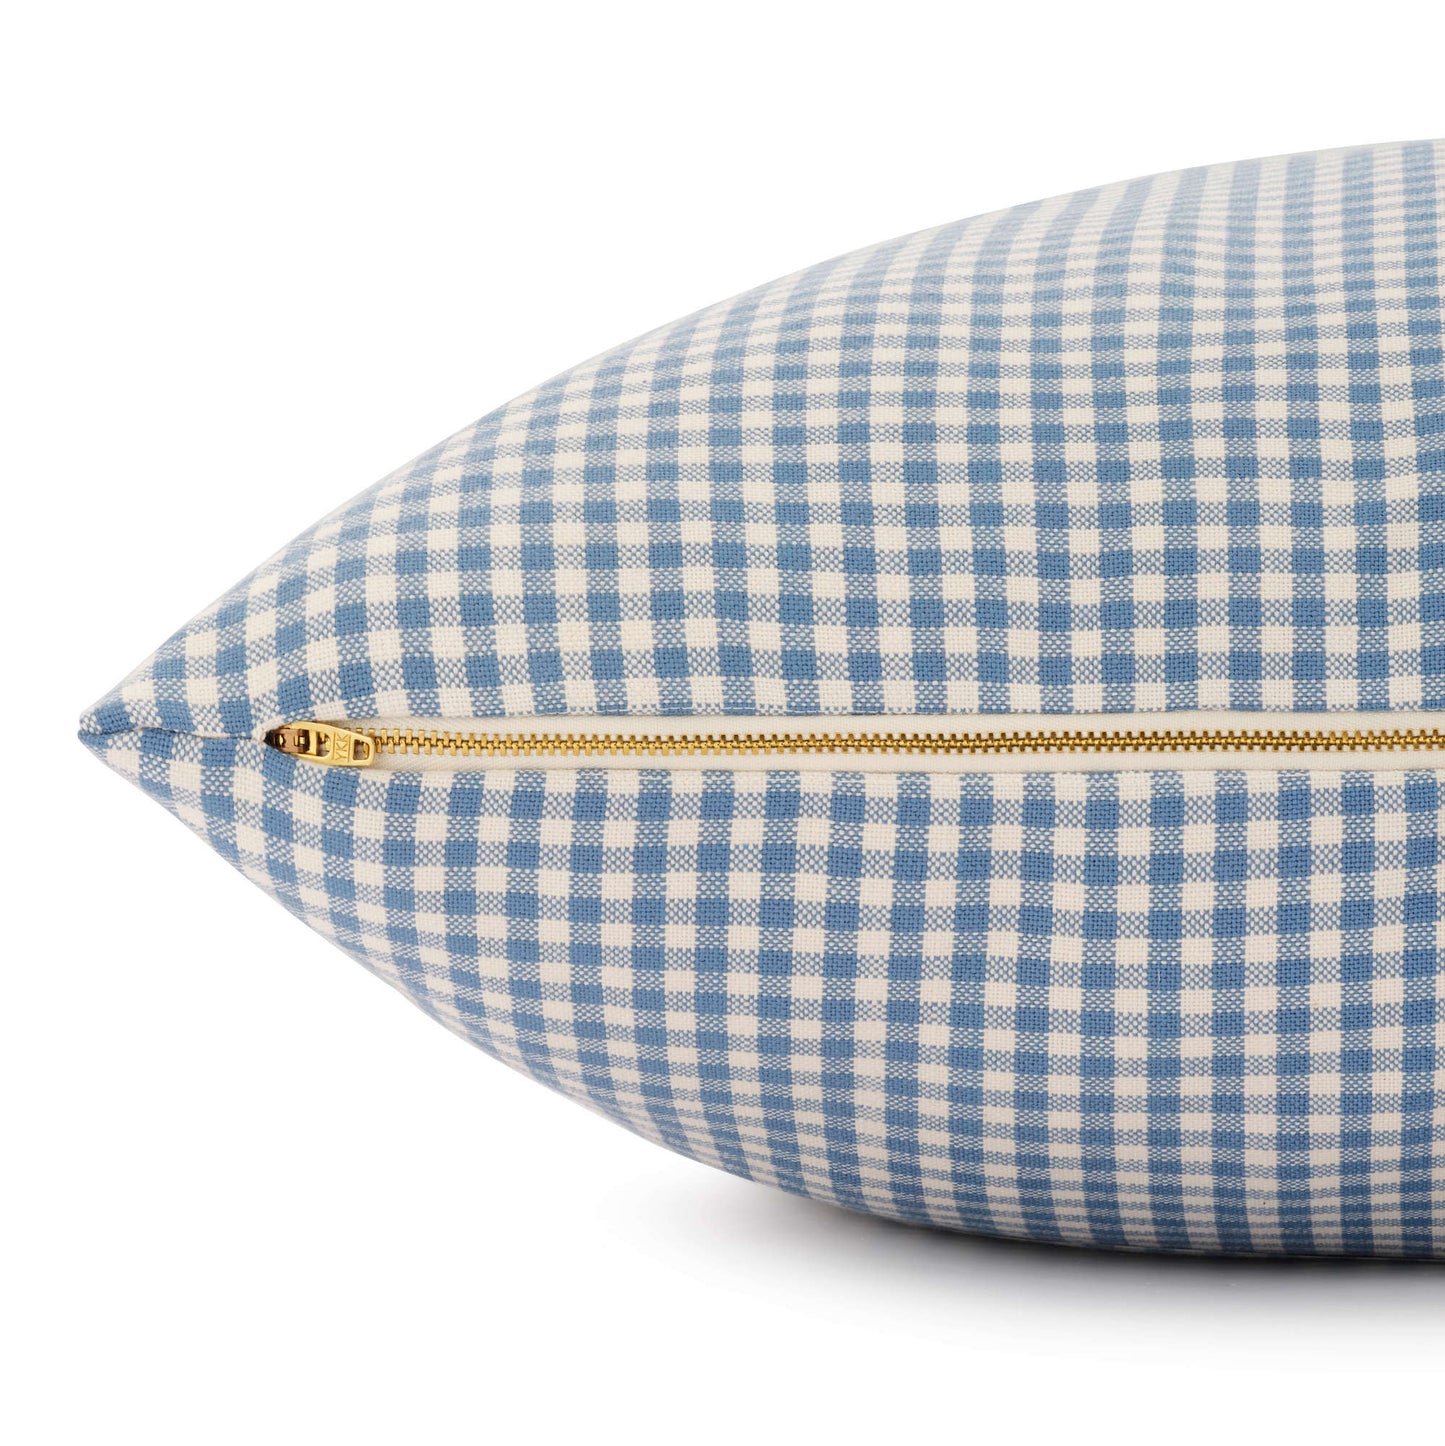 Draper James x TFD Cloud Blue Gingham Dog Bed from The Foggy Dog